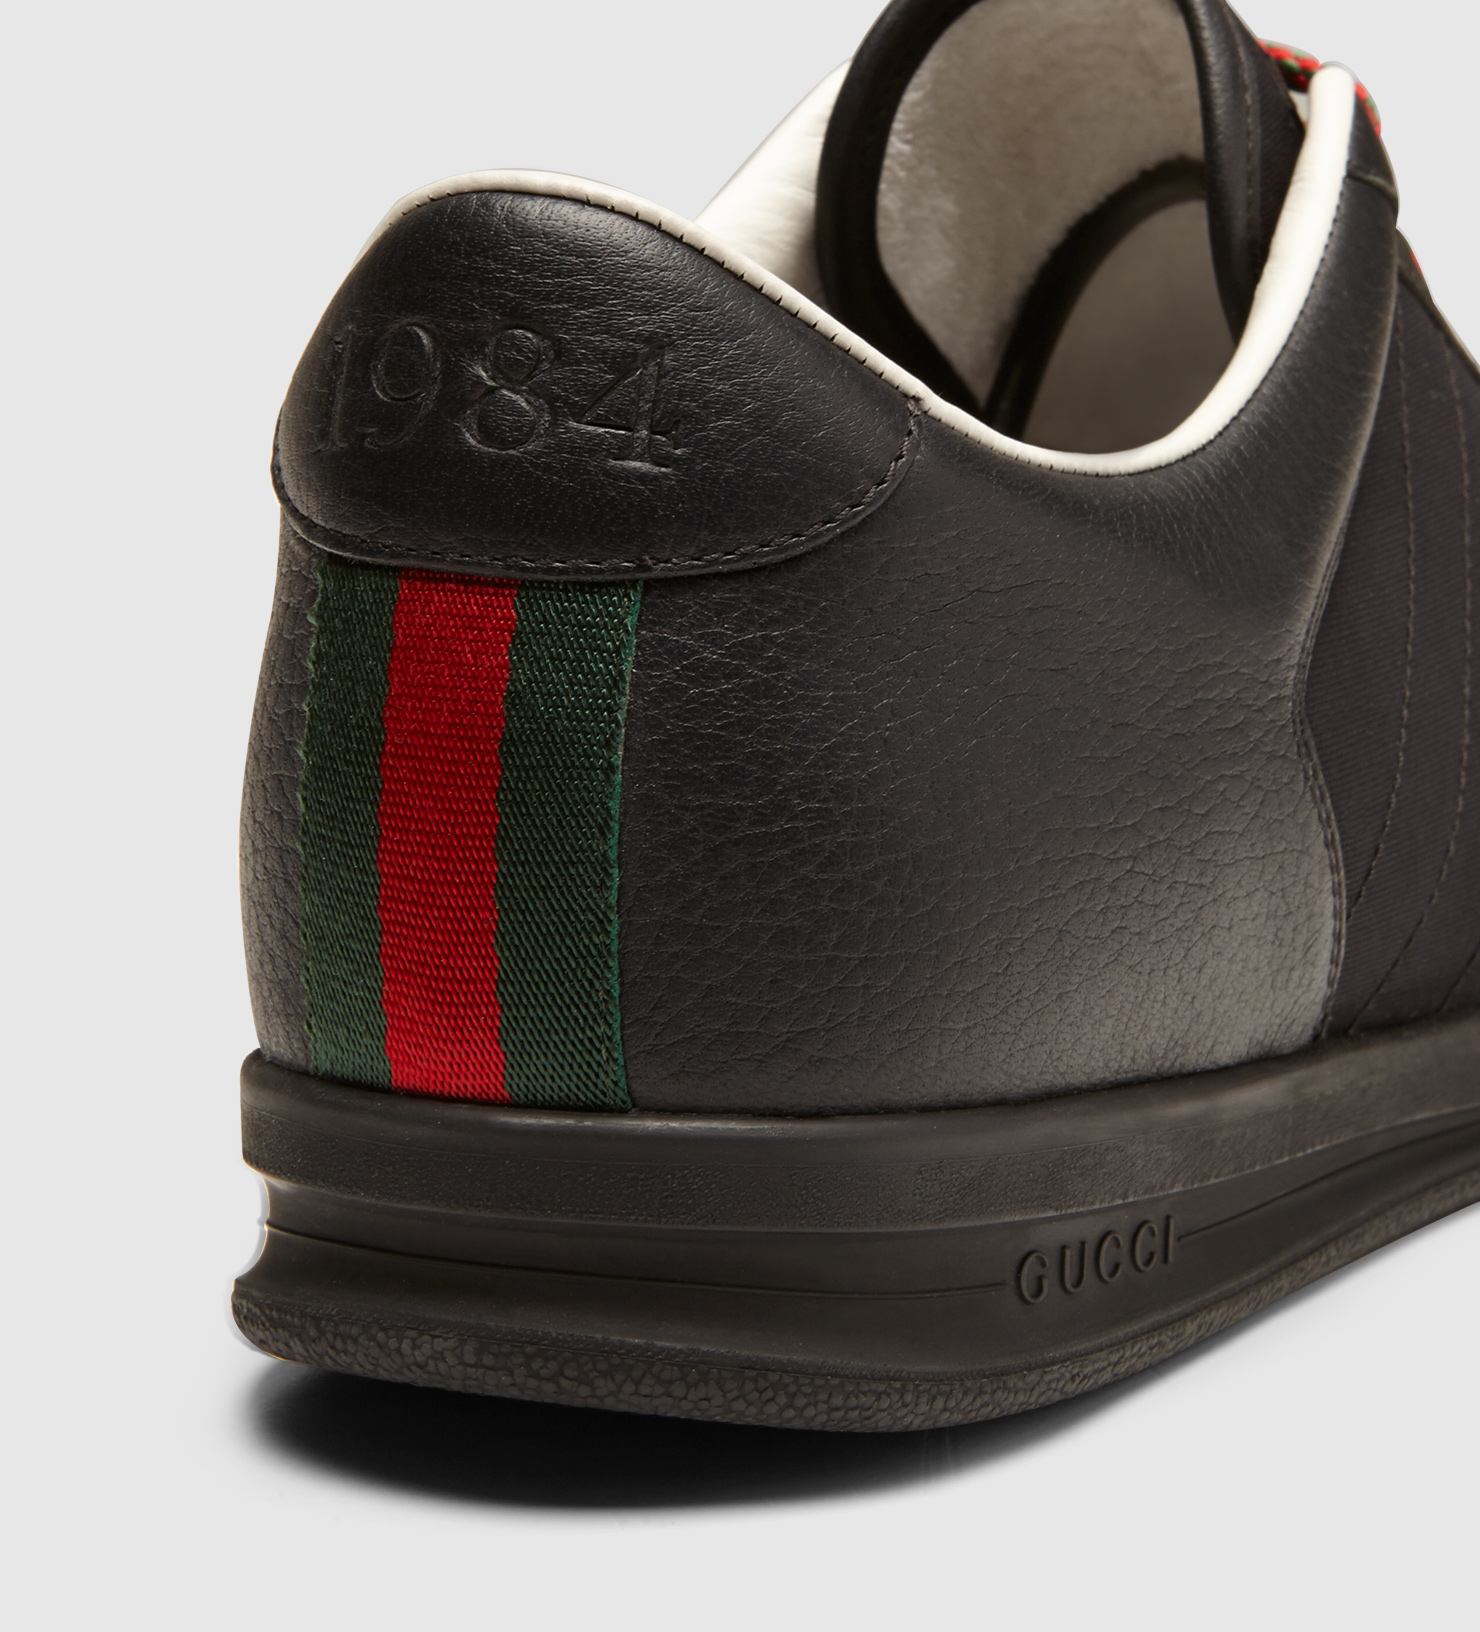 1984 gucci tennis shoes for sale